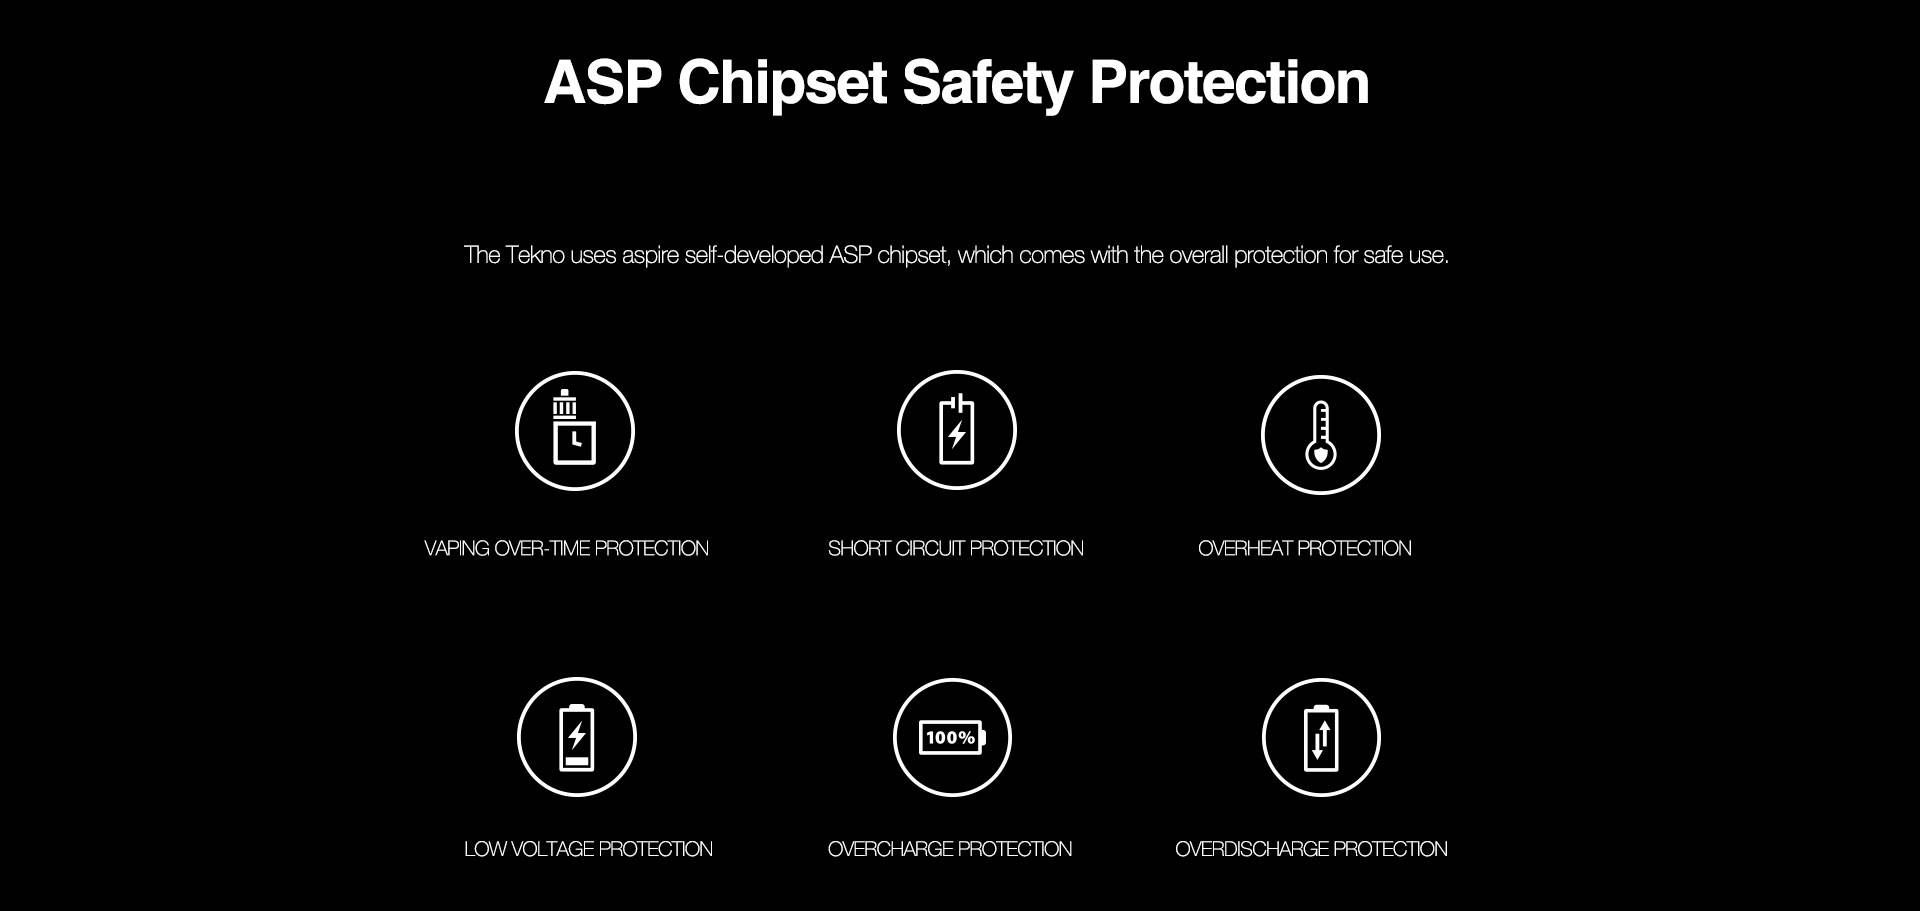 ASP Chipset Safety Protection  The Tekno uses aspire self-developed ASP chipset, which comes with the overall protection for safe use.